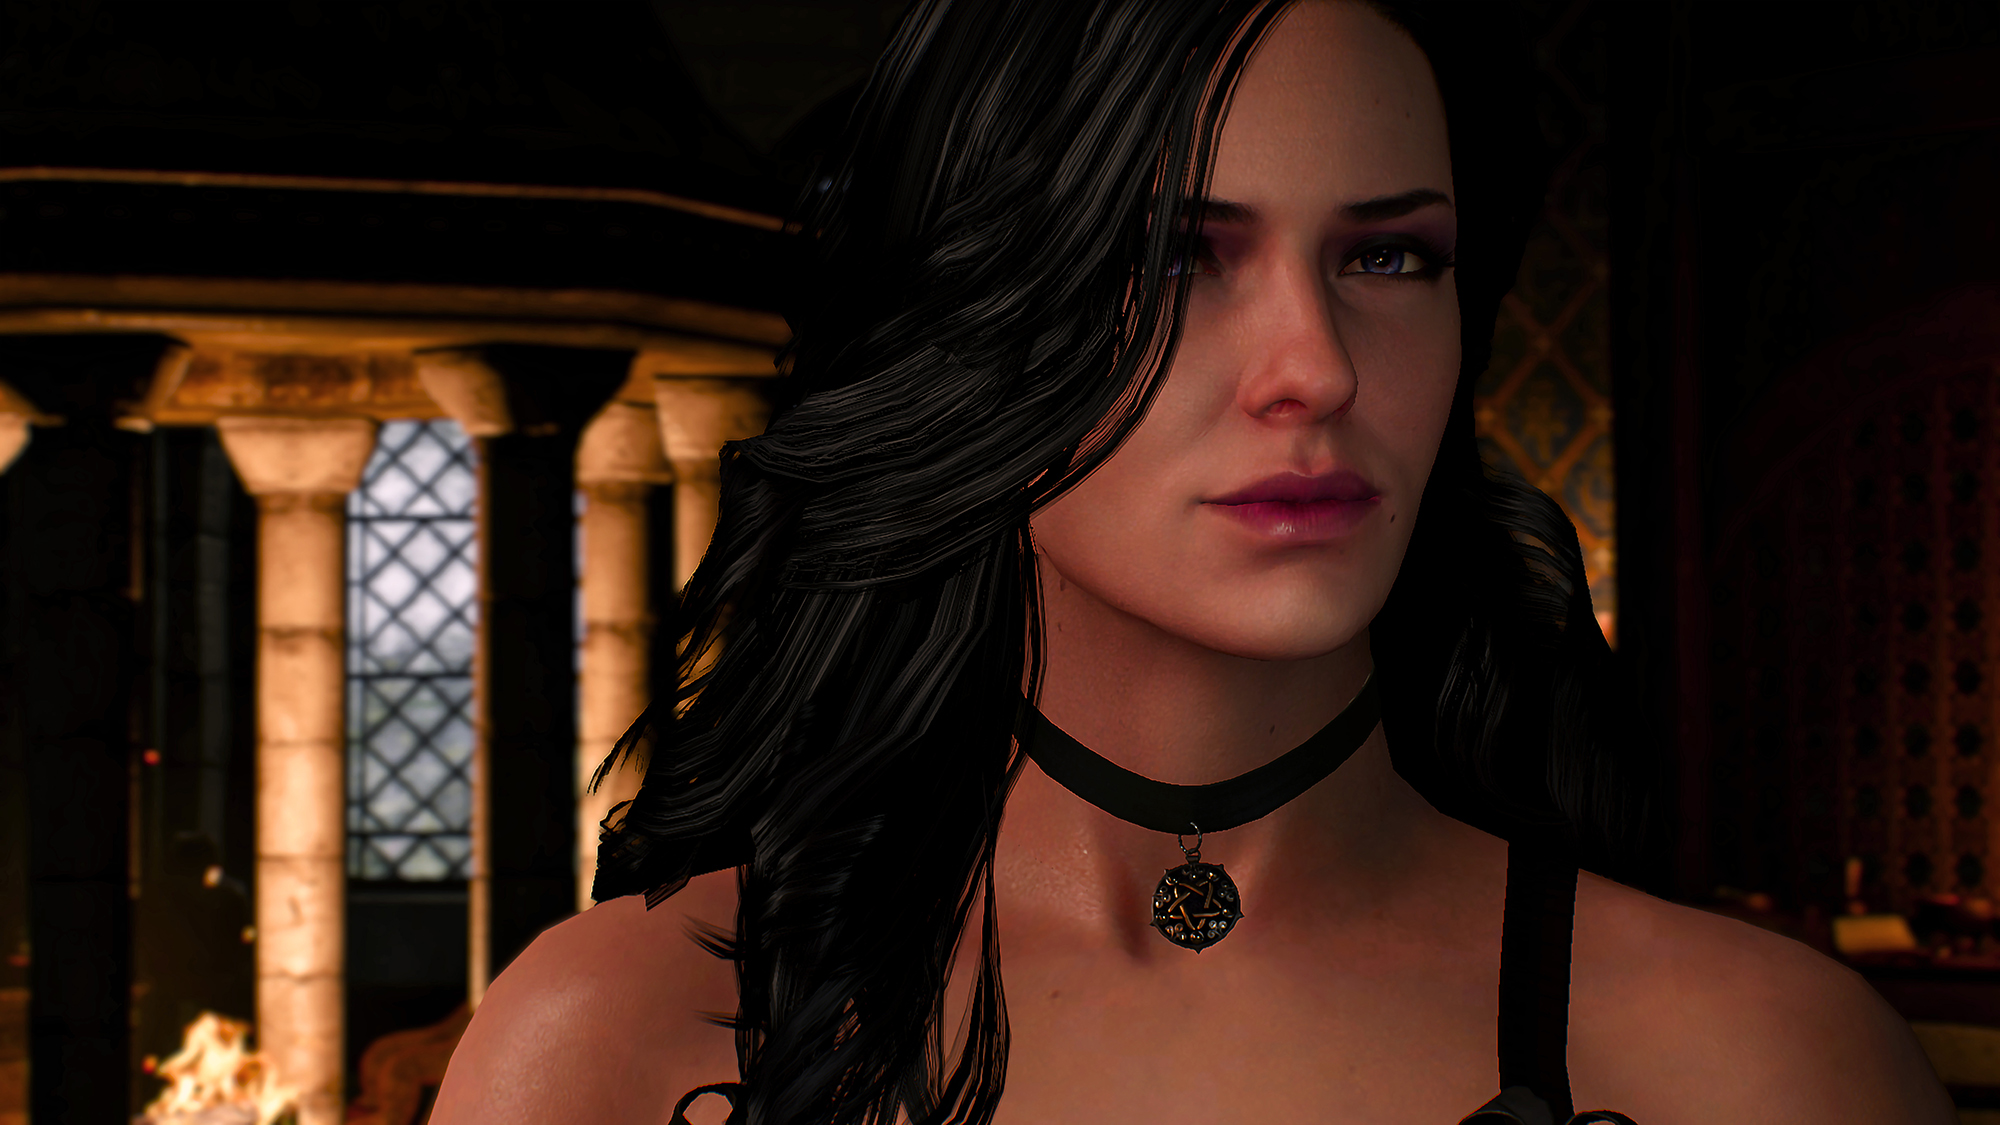 The Witcher 3 The Witcher 3 Wild Hunt Yennefer Yennefer Of Vengerberg CD Projekt RED Video Games Vid 2000x1125